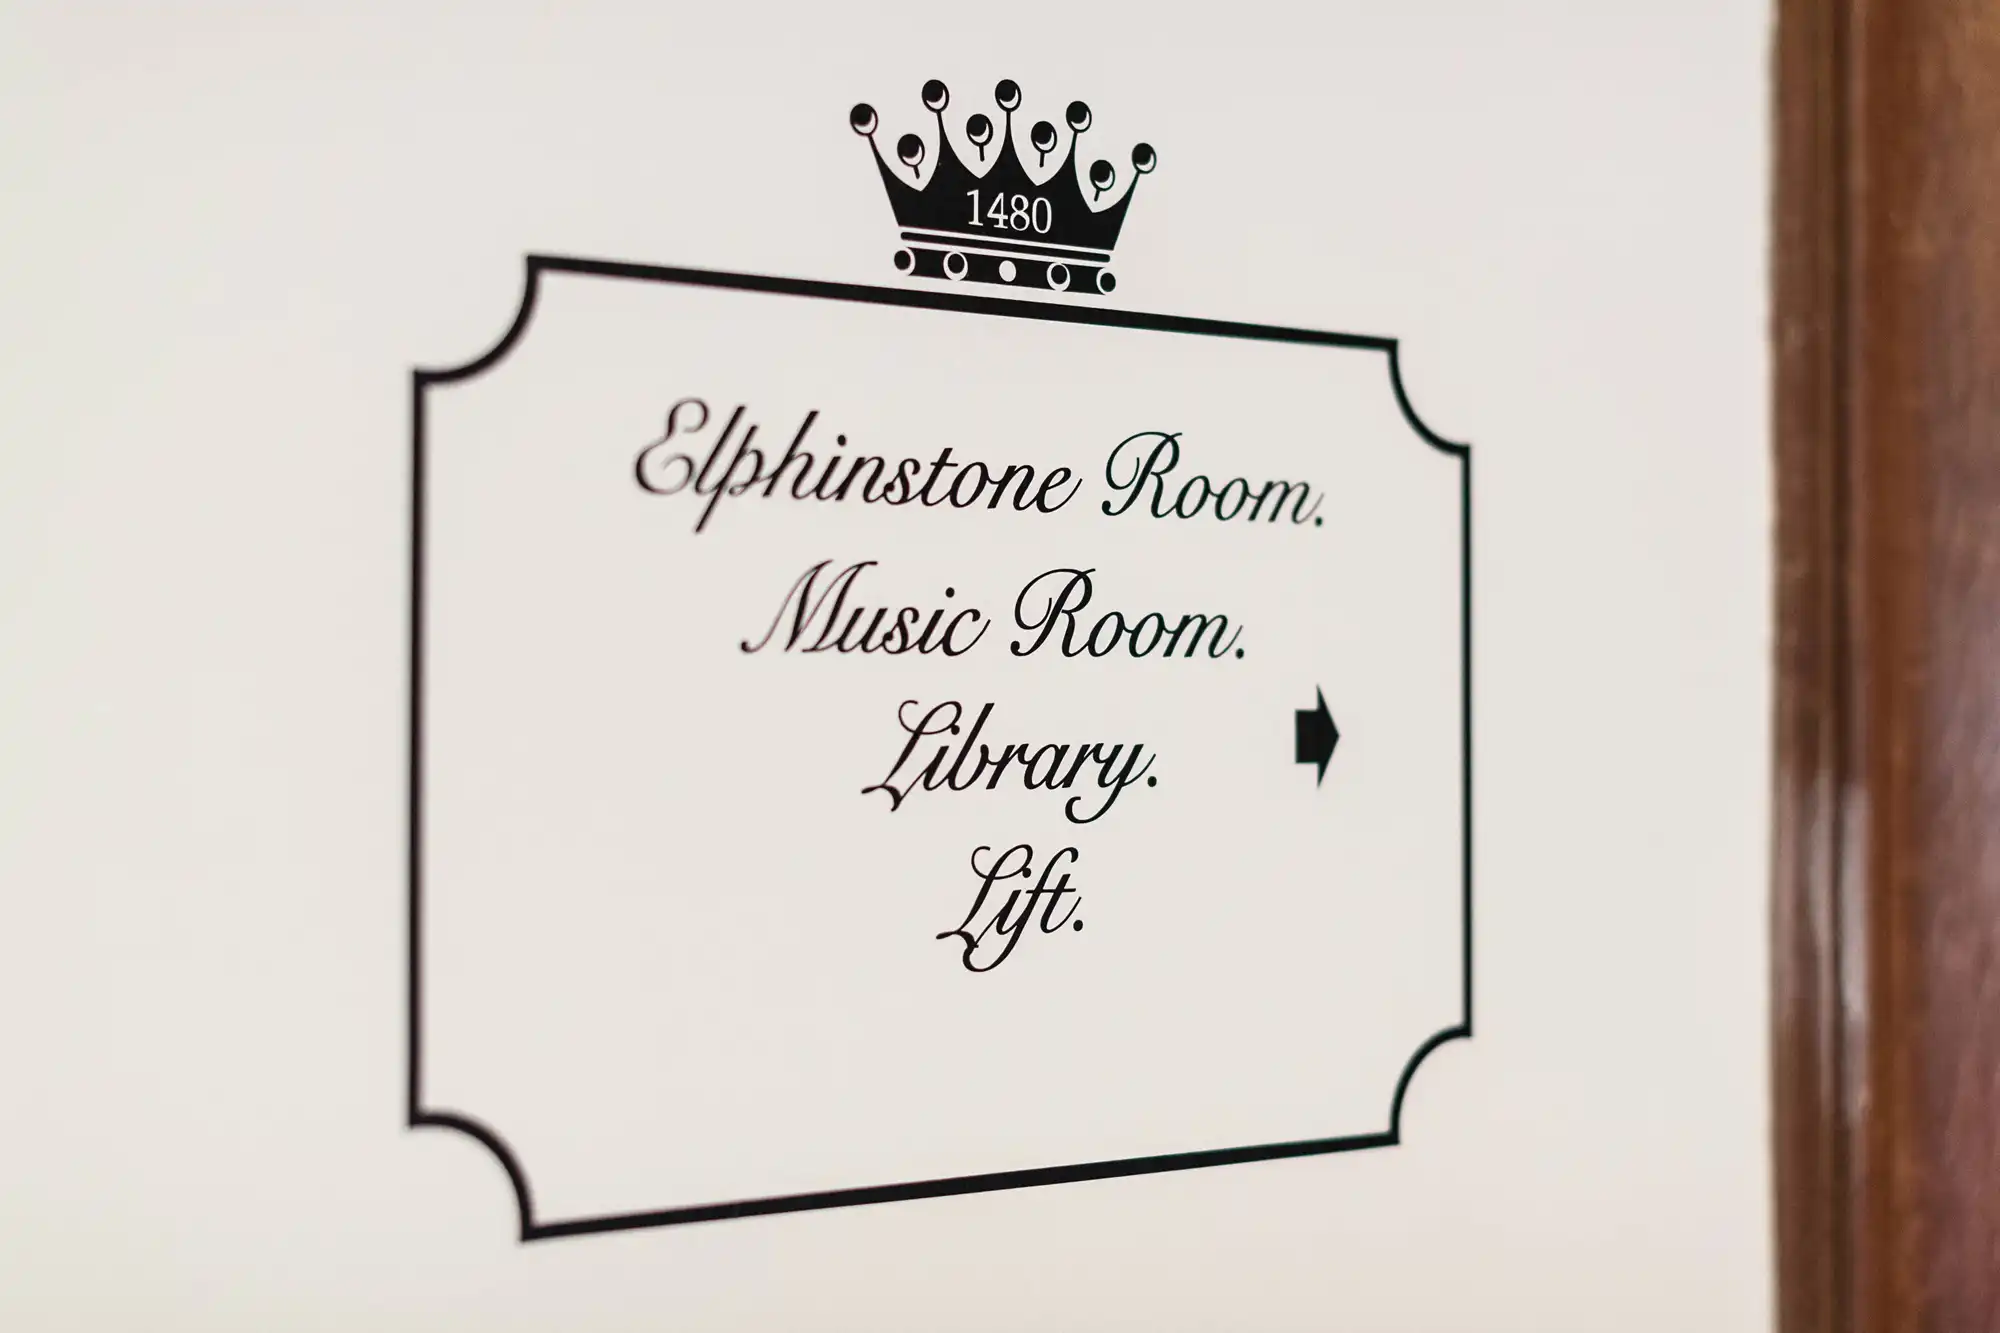 Sign on a wall indicating directions to "elphinstone room," "music room," "library," and "lift," featuring ornate calligraphy and a crown symbol.